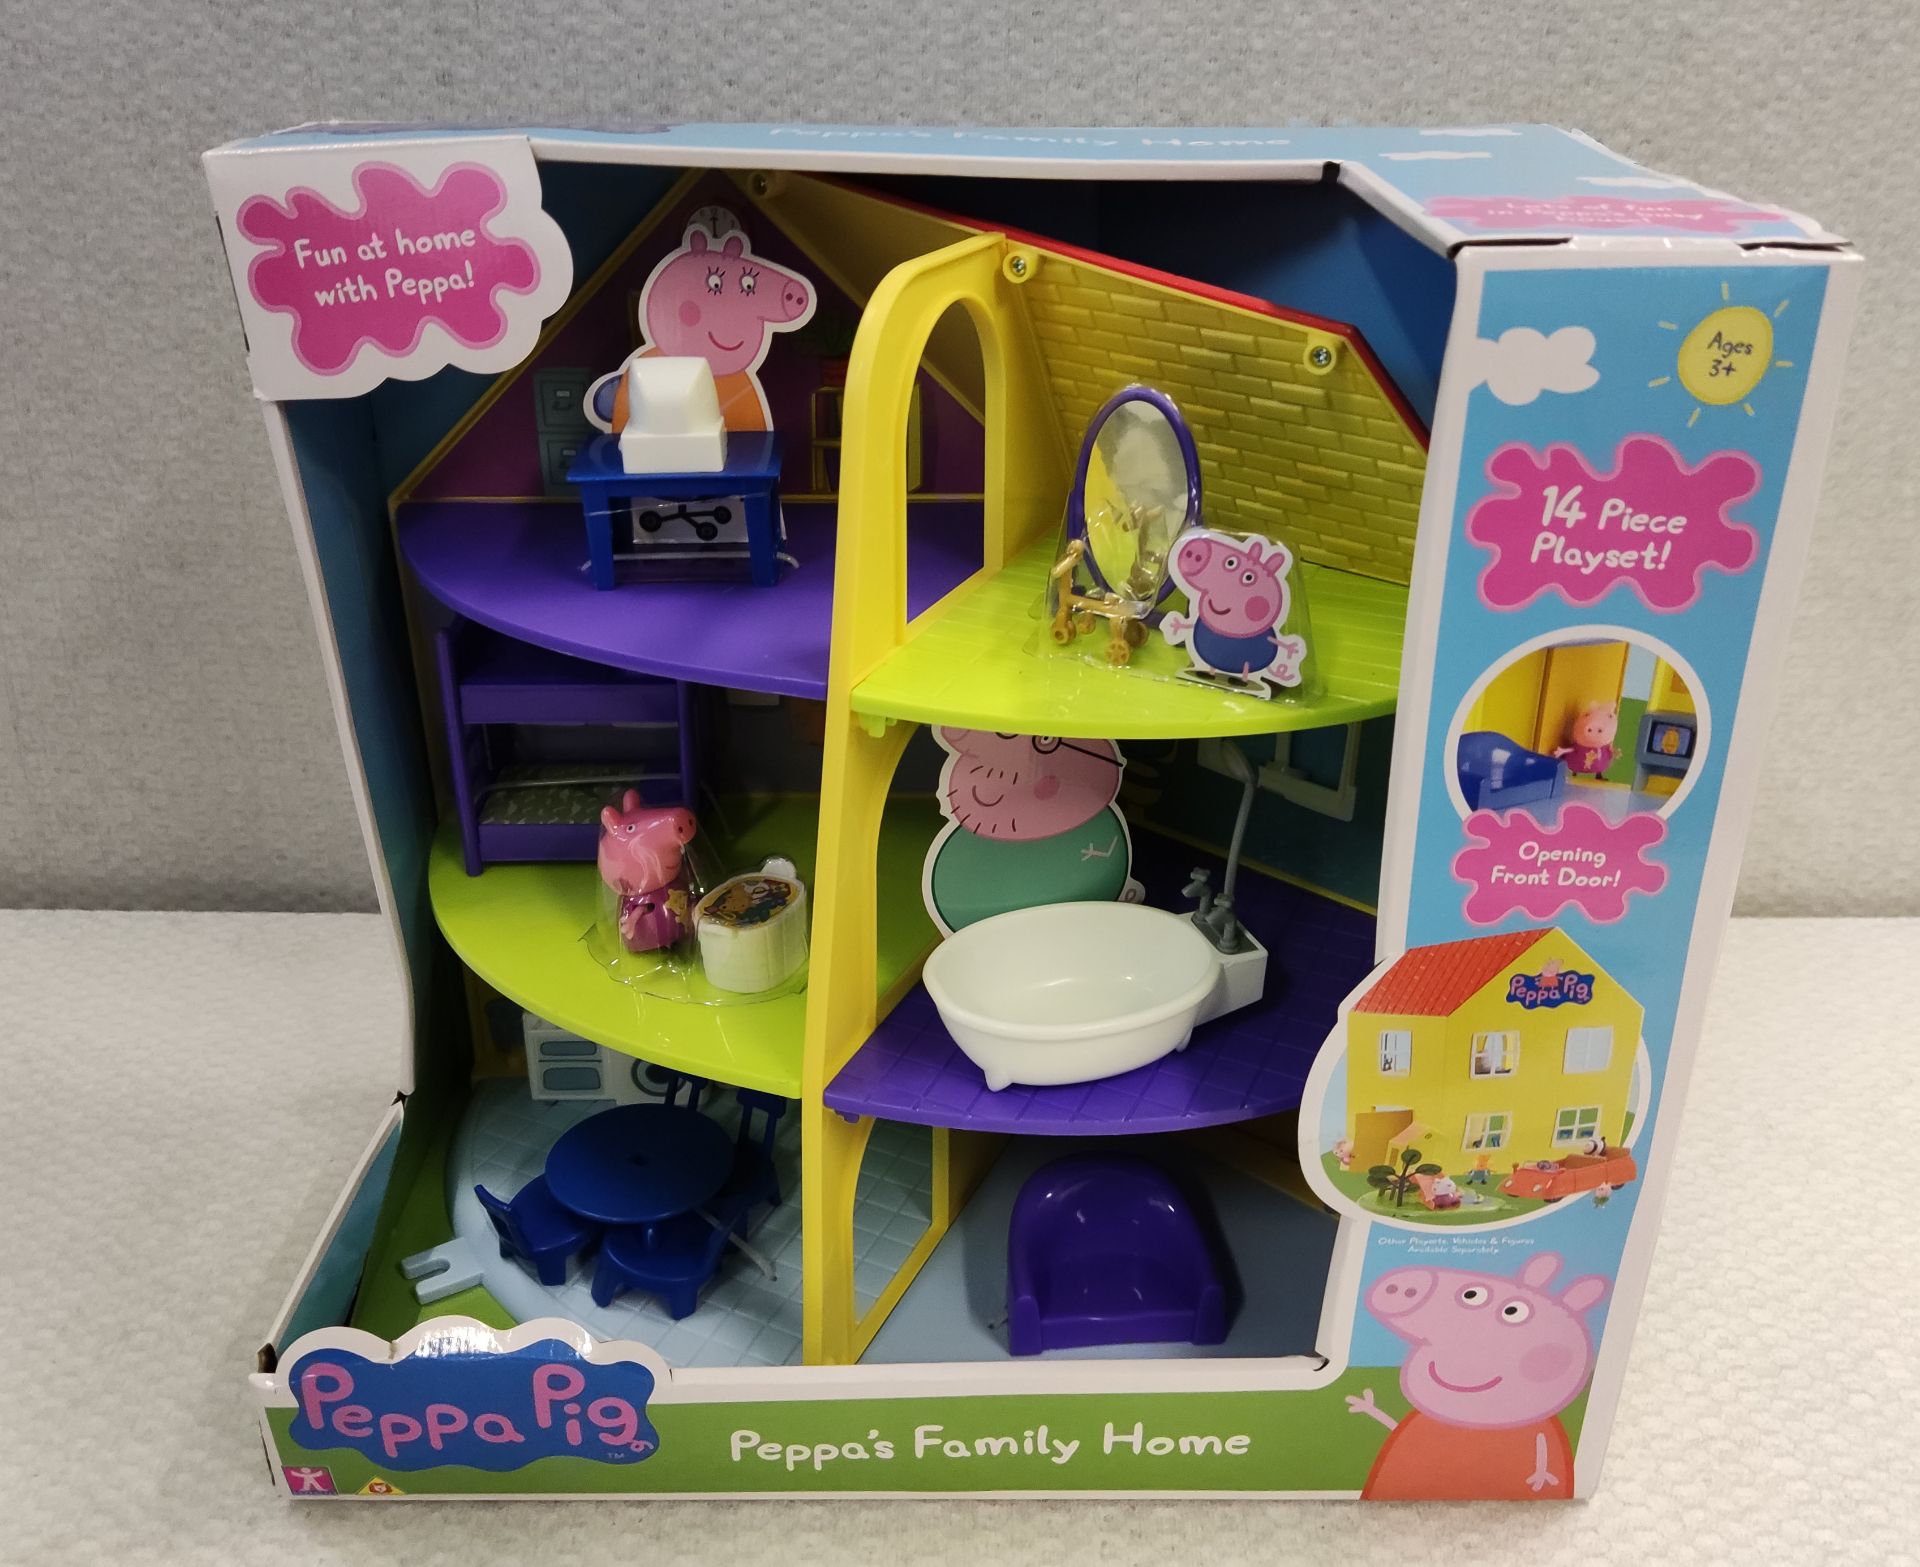 1 x Peppa Pig Peppa's Family Home Play Set - New/Boxed - Image 6 of 6